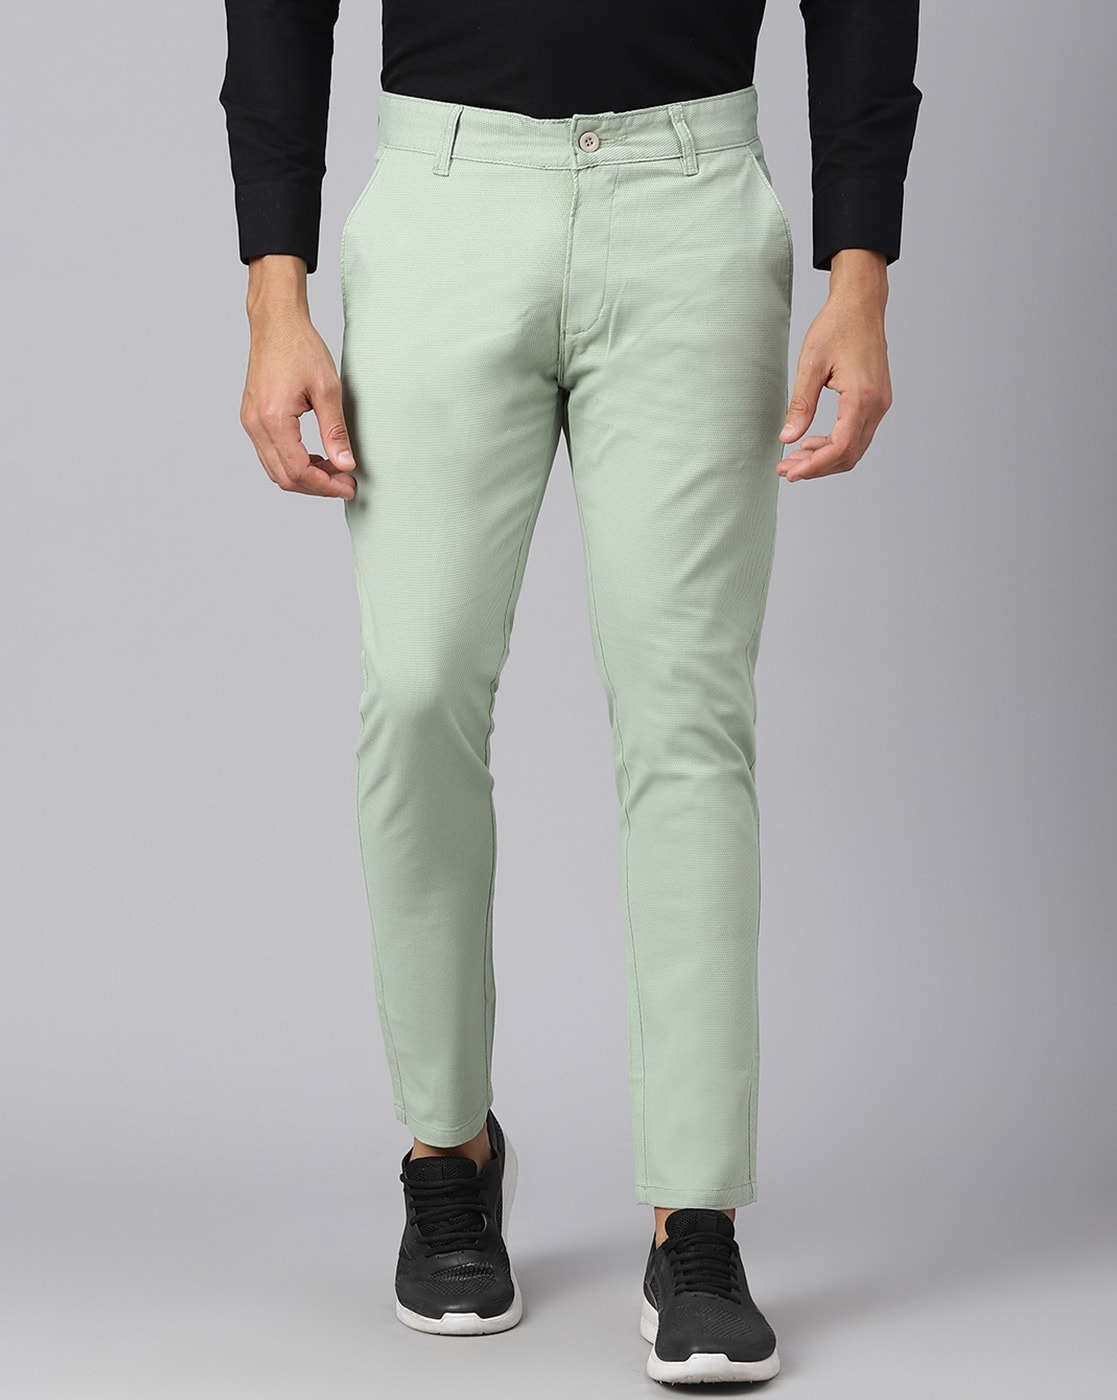 Men's Trousers & Chinos | Slim, Straight & More | FatFace UK